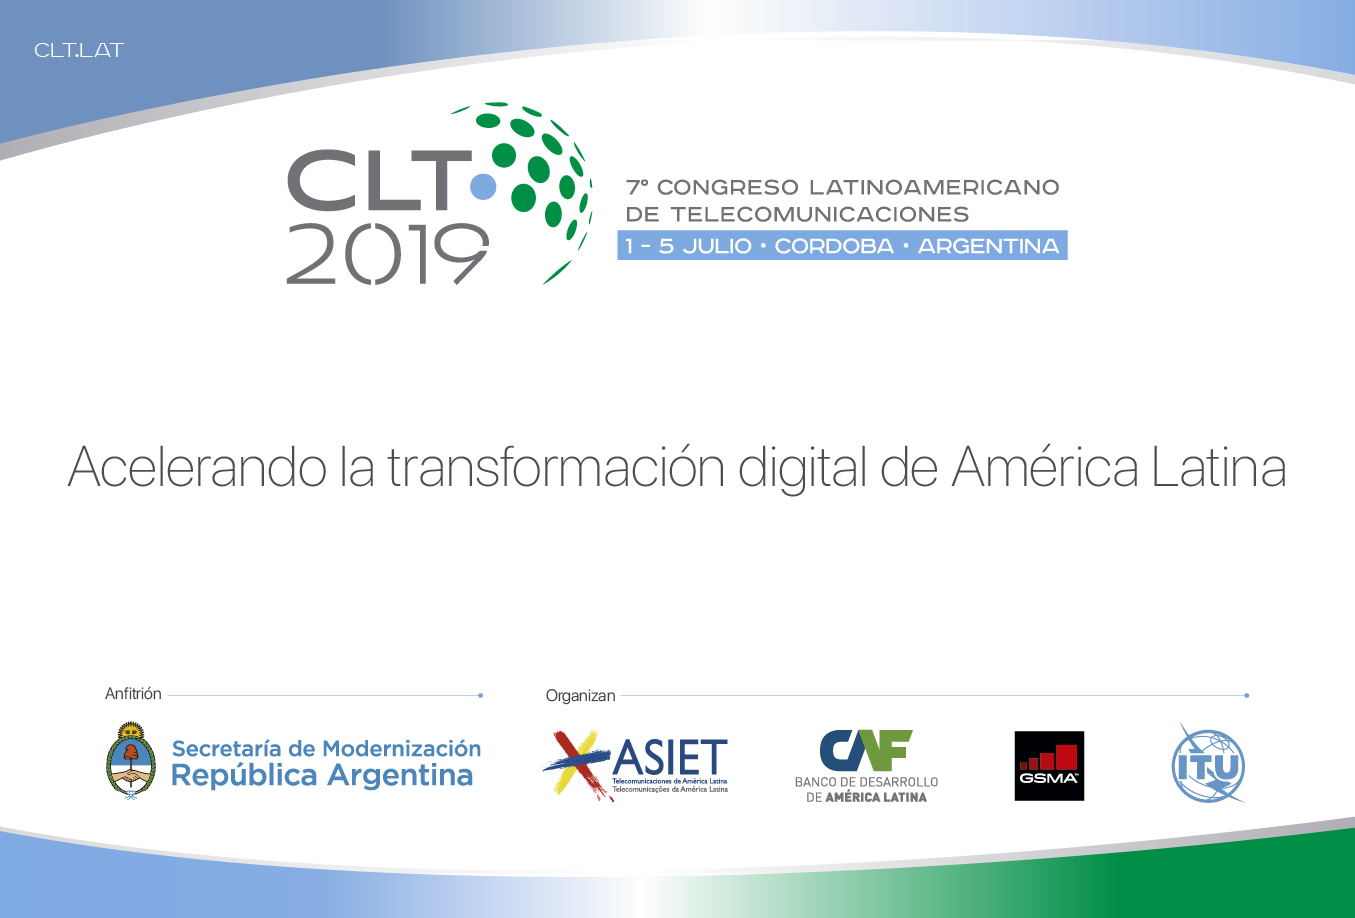 Main topics of CLT19: 5G, digital economy, infrastructure investment, spectrum use, and inclusion